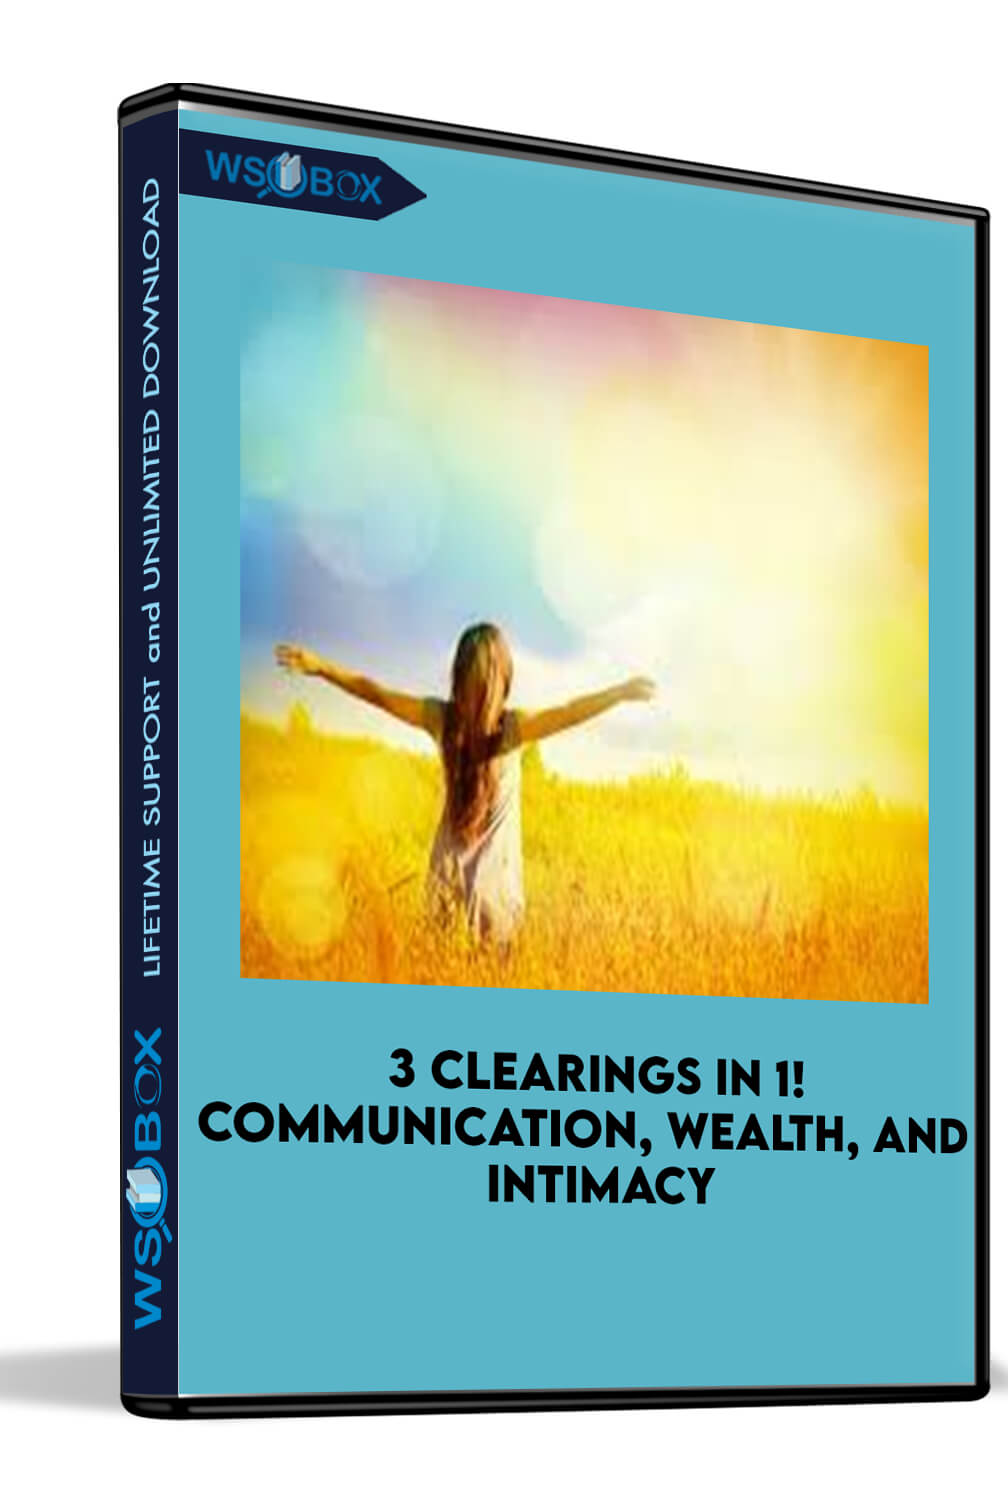 3 Clearings in 1! Communication, Wealth, and Intimacy